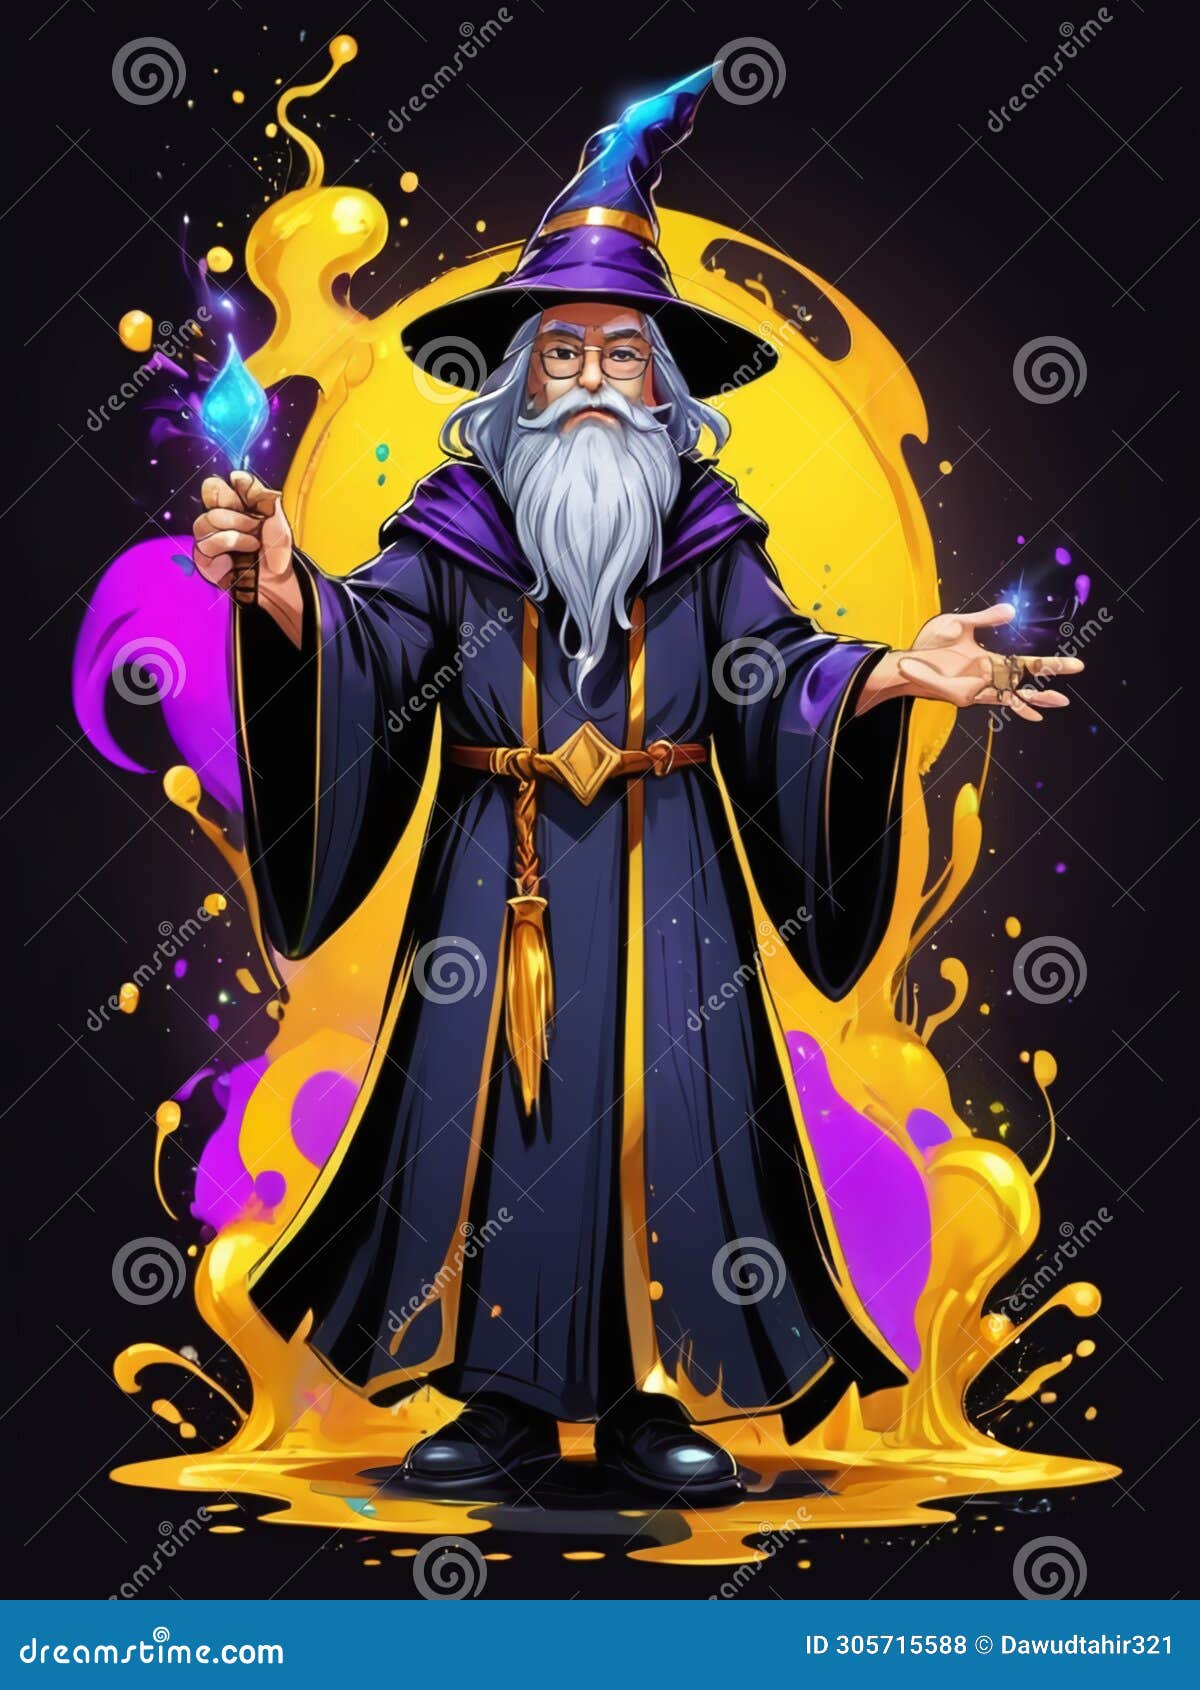 vivid wizardry neon delights in cartoon splash art - a dazzling fusion of gold and black hues